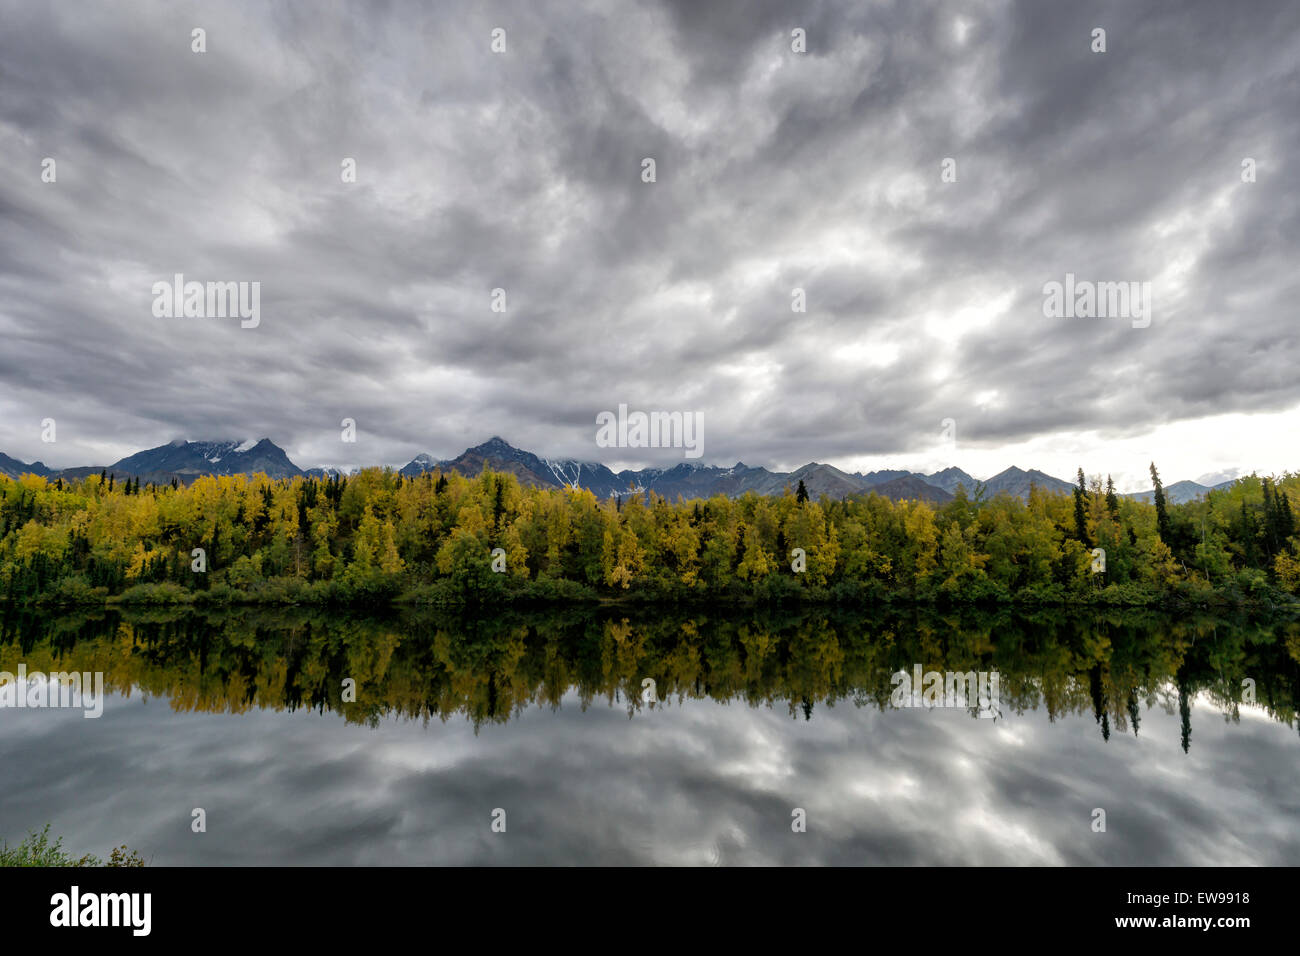 Aspen Forest reflecting off an interior Alaska Lake - with dramatic clouds in the background from an approaching storm Stock Photo